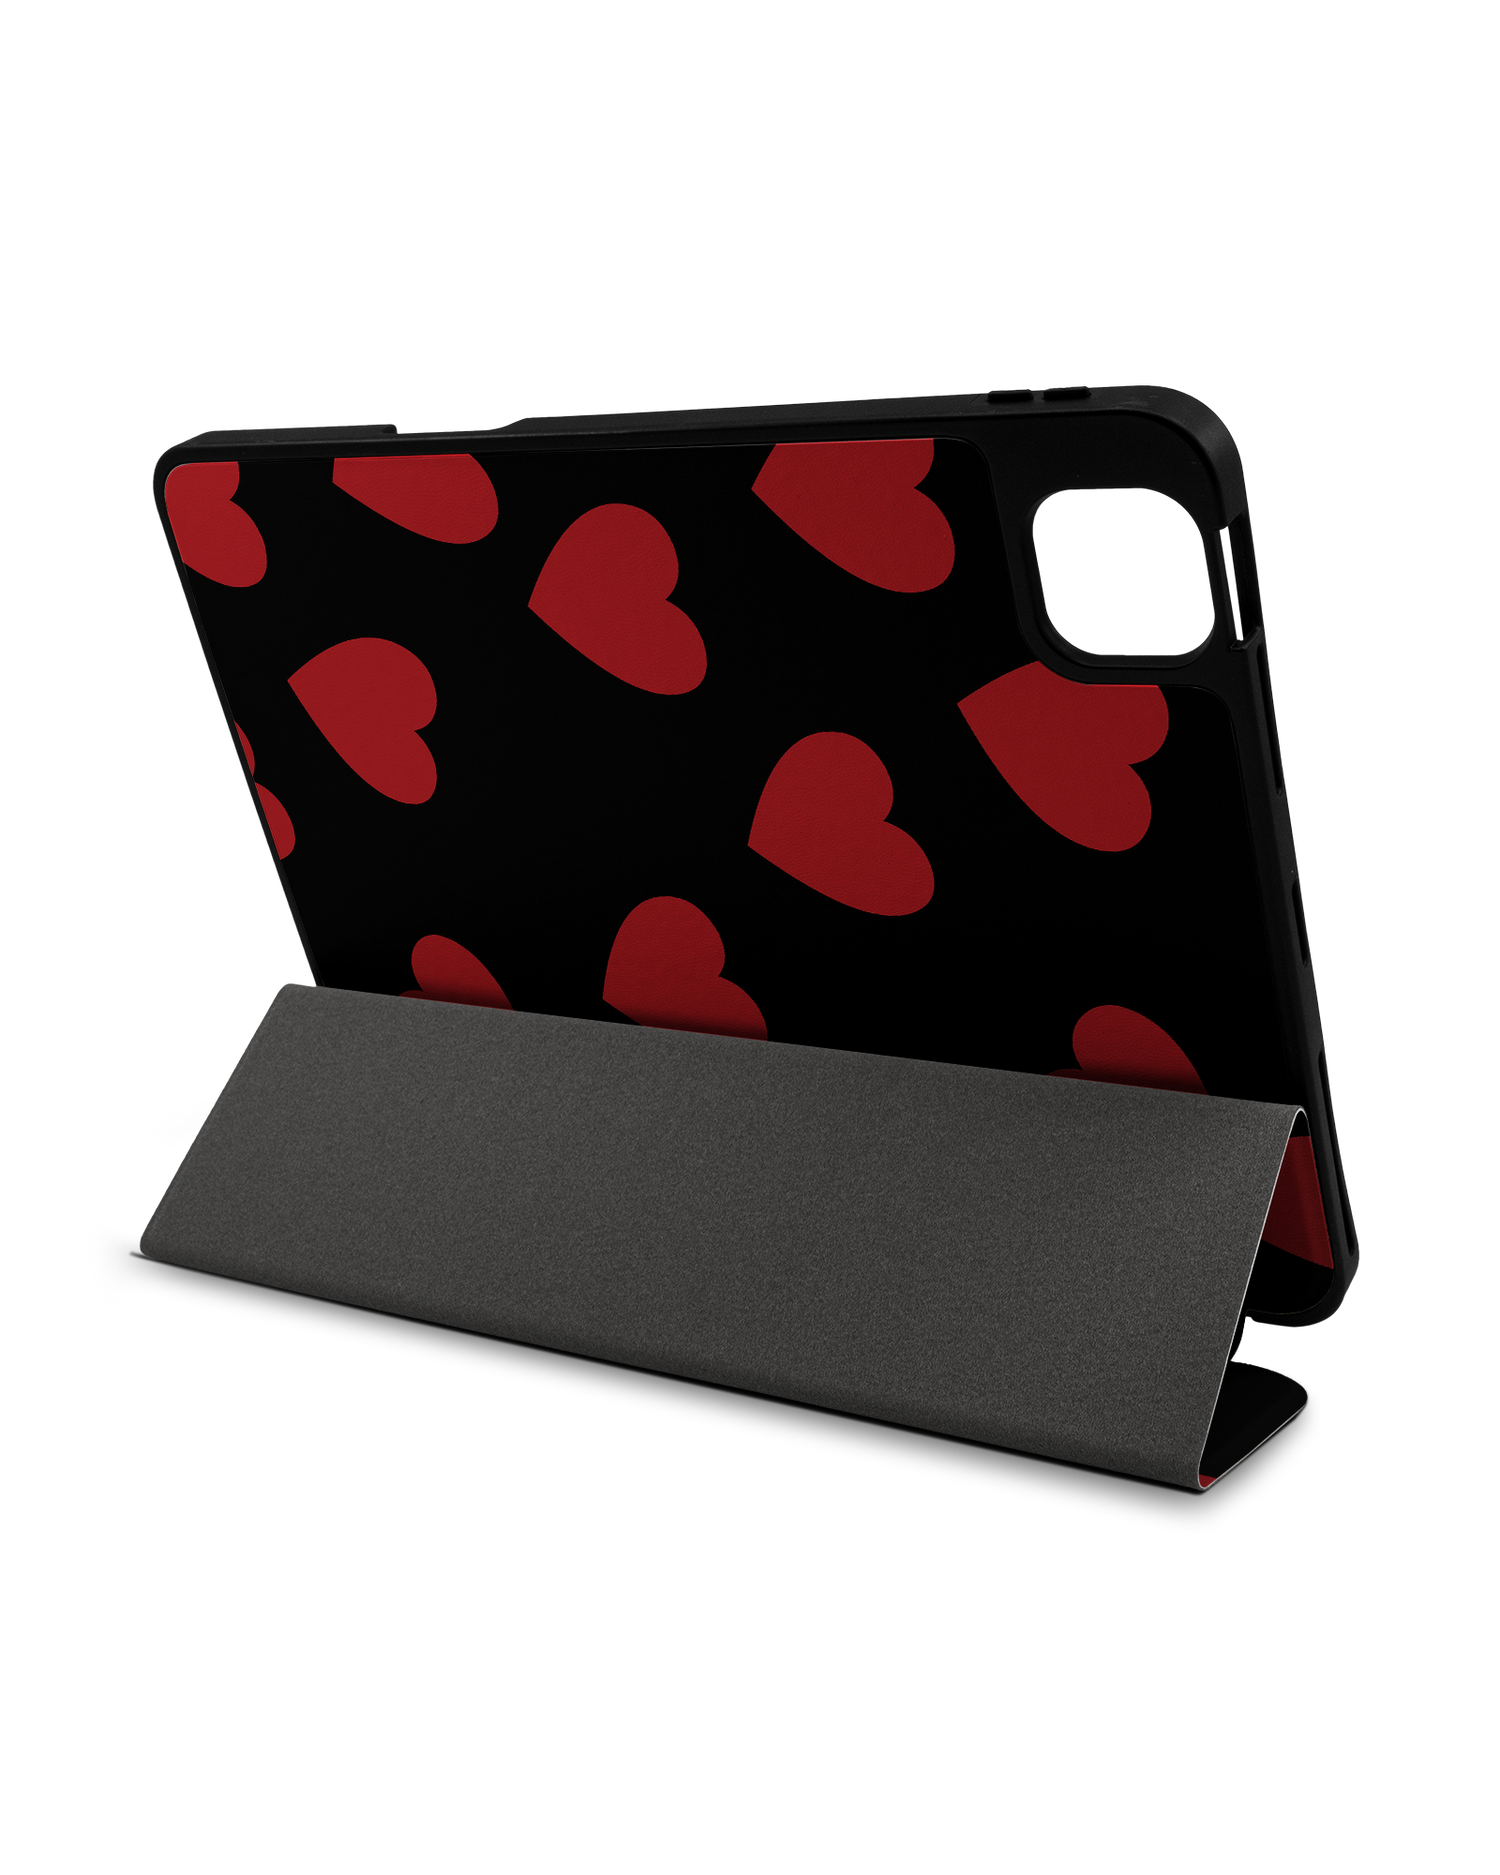 Repeating Hearts iPad Case with Pencil Holder Apple iPad Pro 11